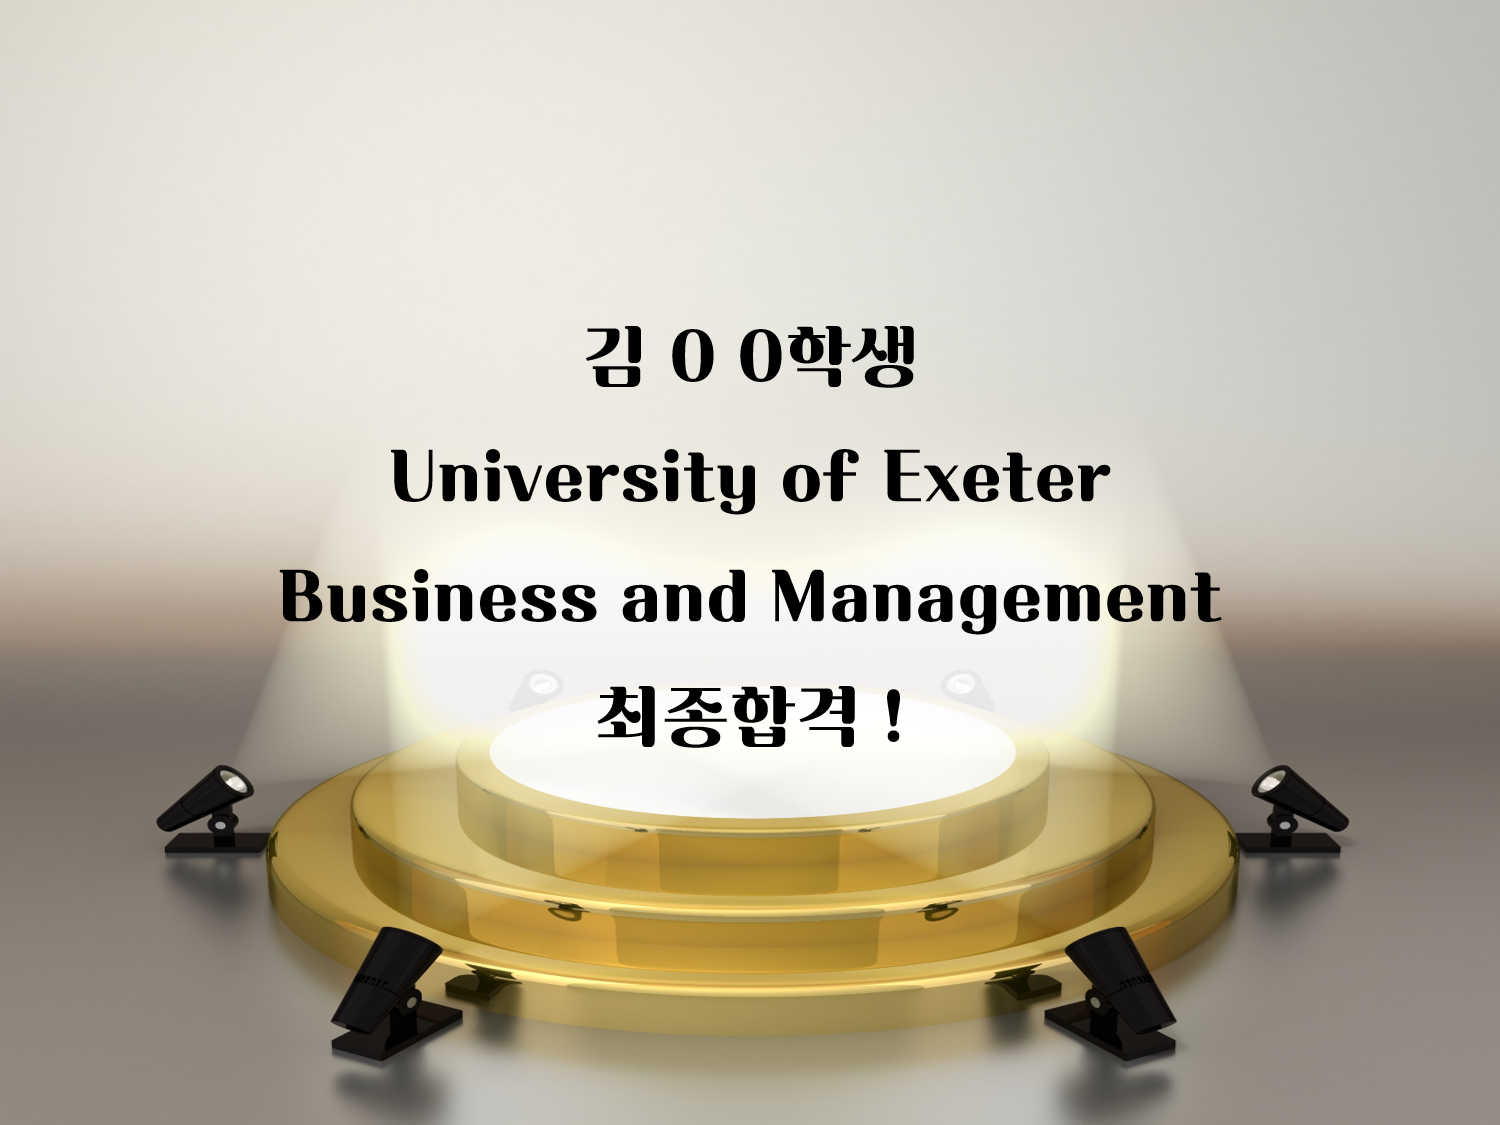 Univeristy of Exeter: Business and Management